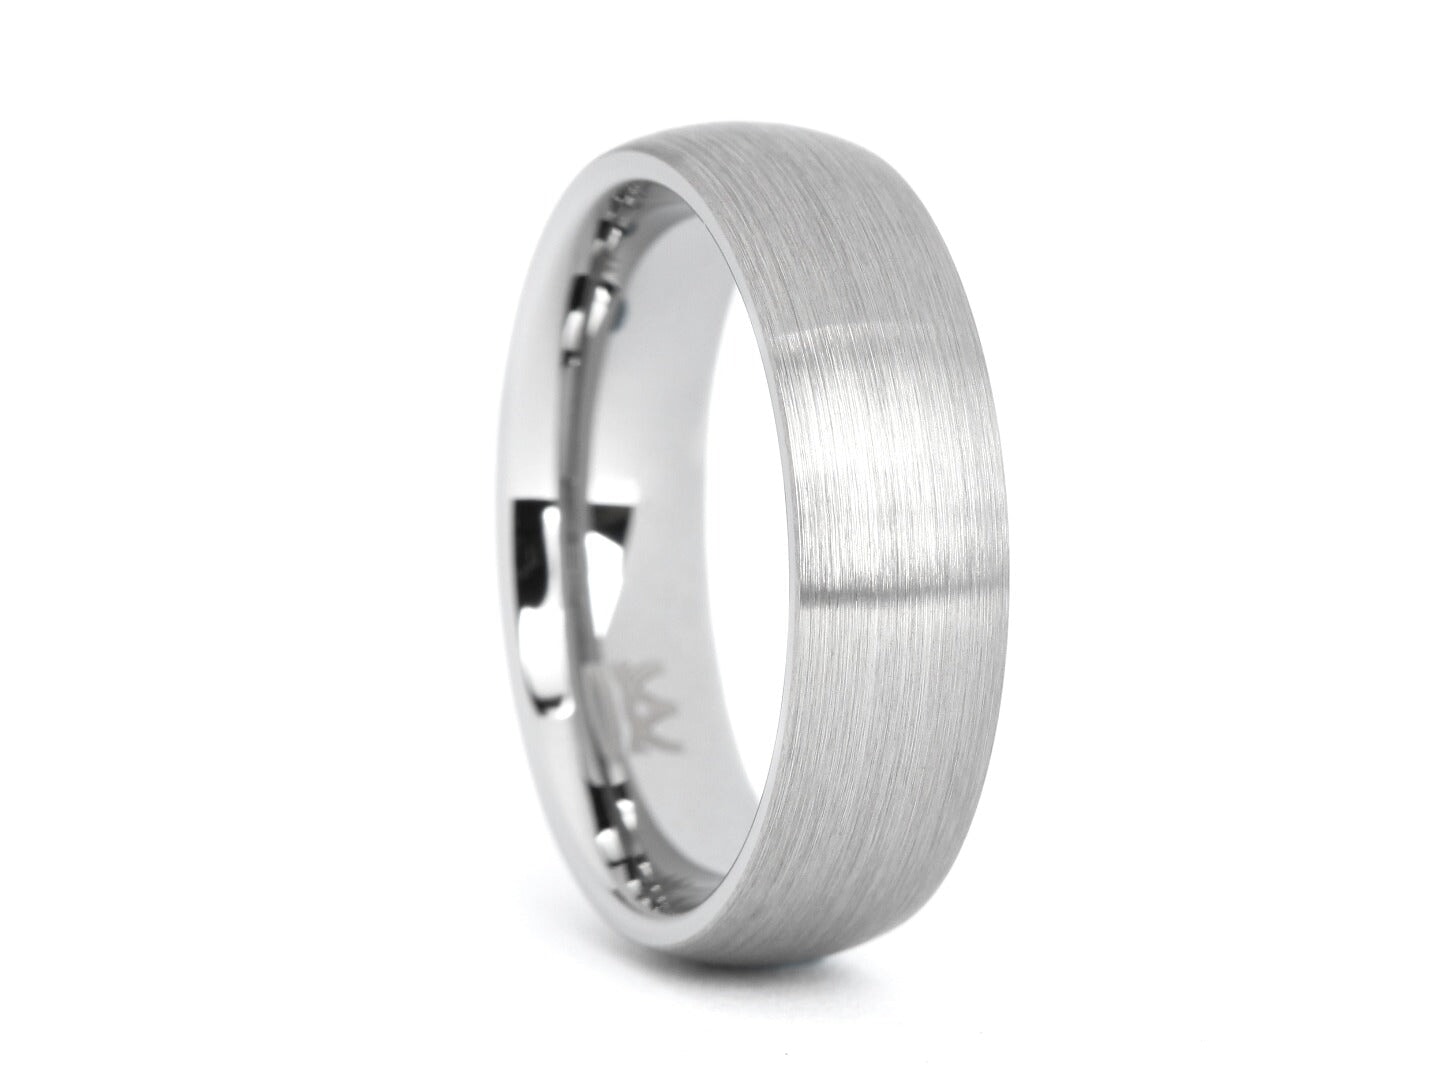 The Weiland Raw Tungsten Ring Rings 